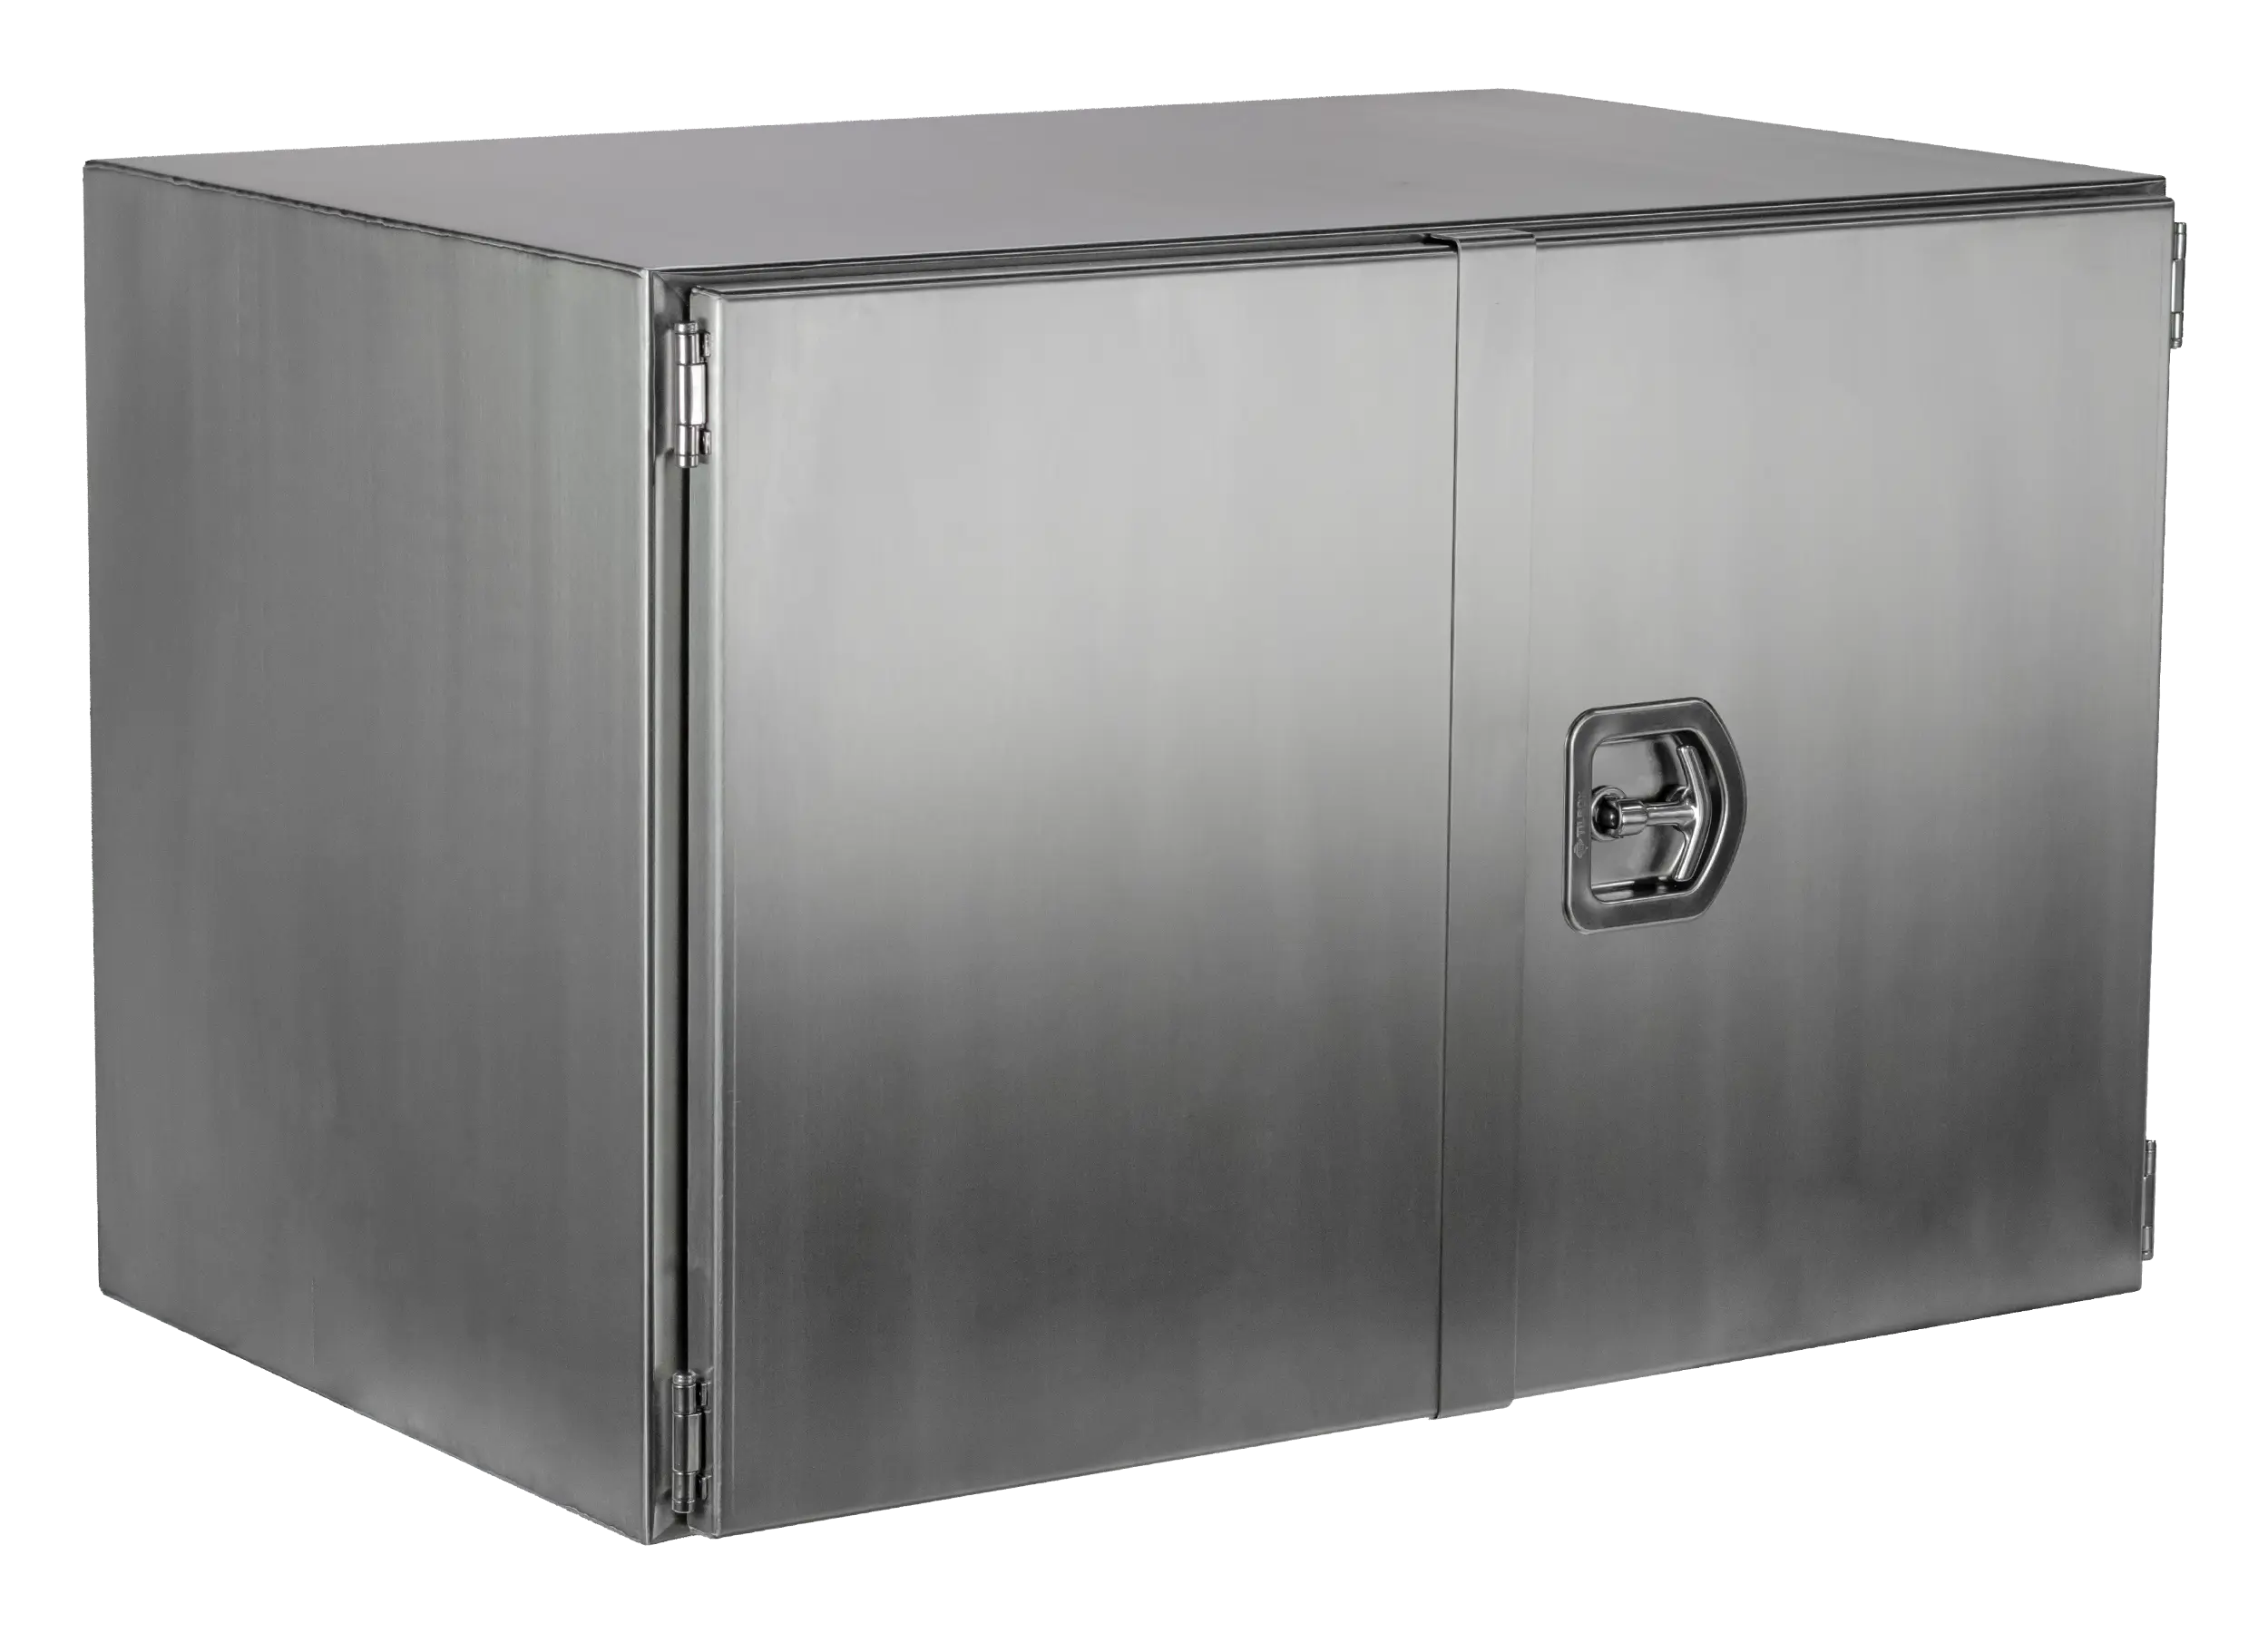 Toolbox - Stainless Steel – Overlapping Doors - 1000x500x500 mm